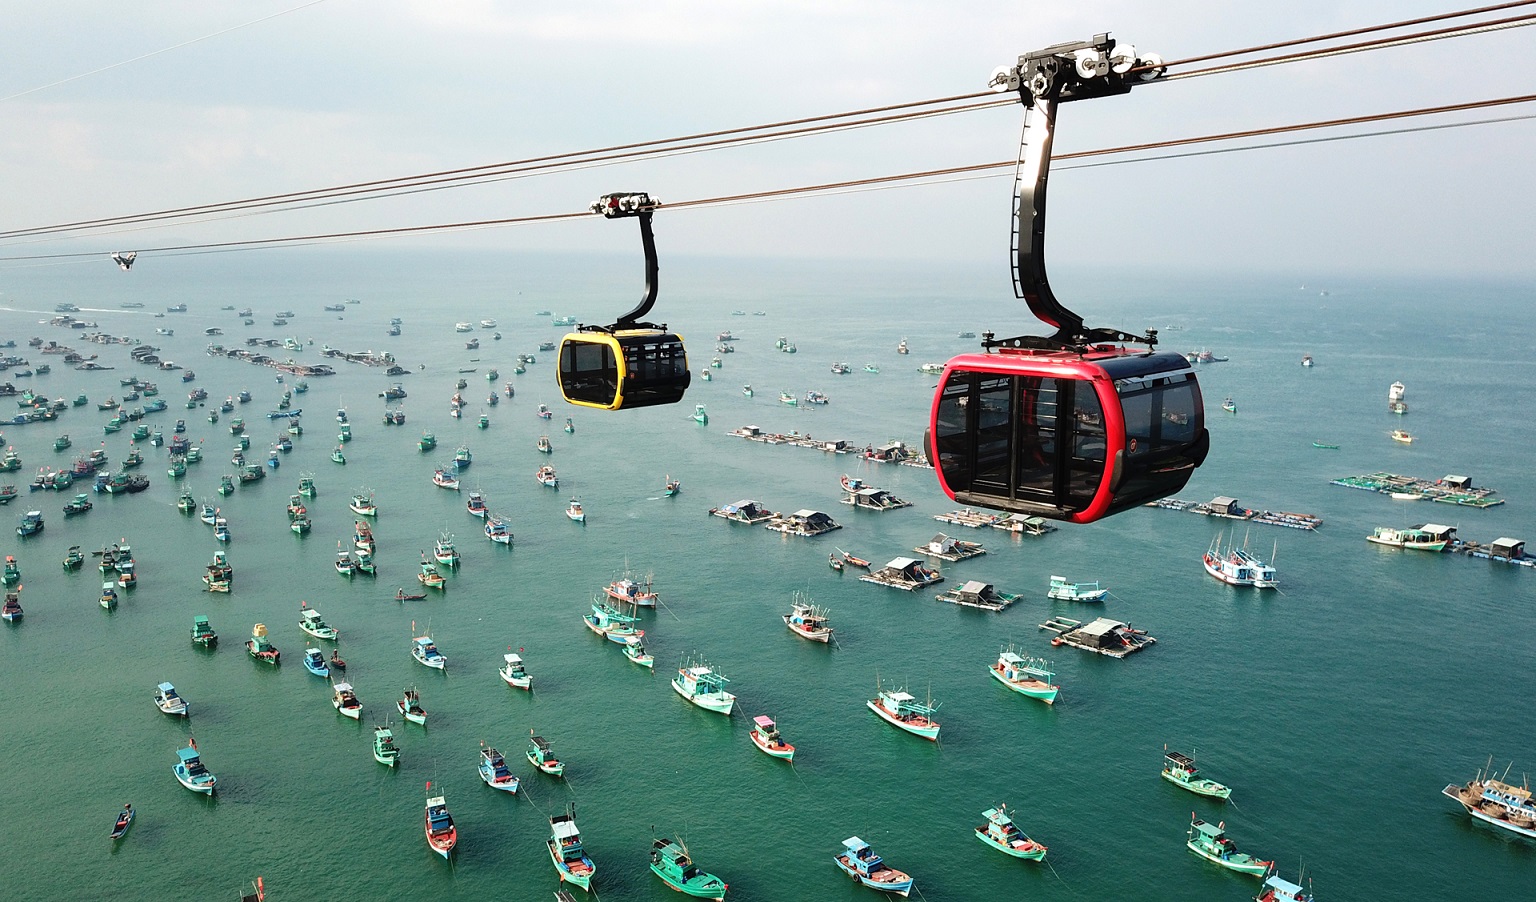 The world’s longest cable car delivers tourists to Phu Quoc